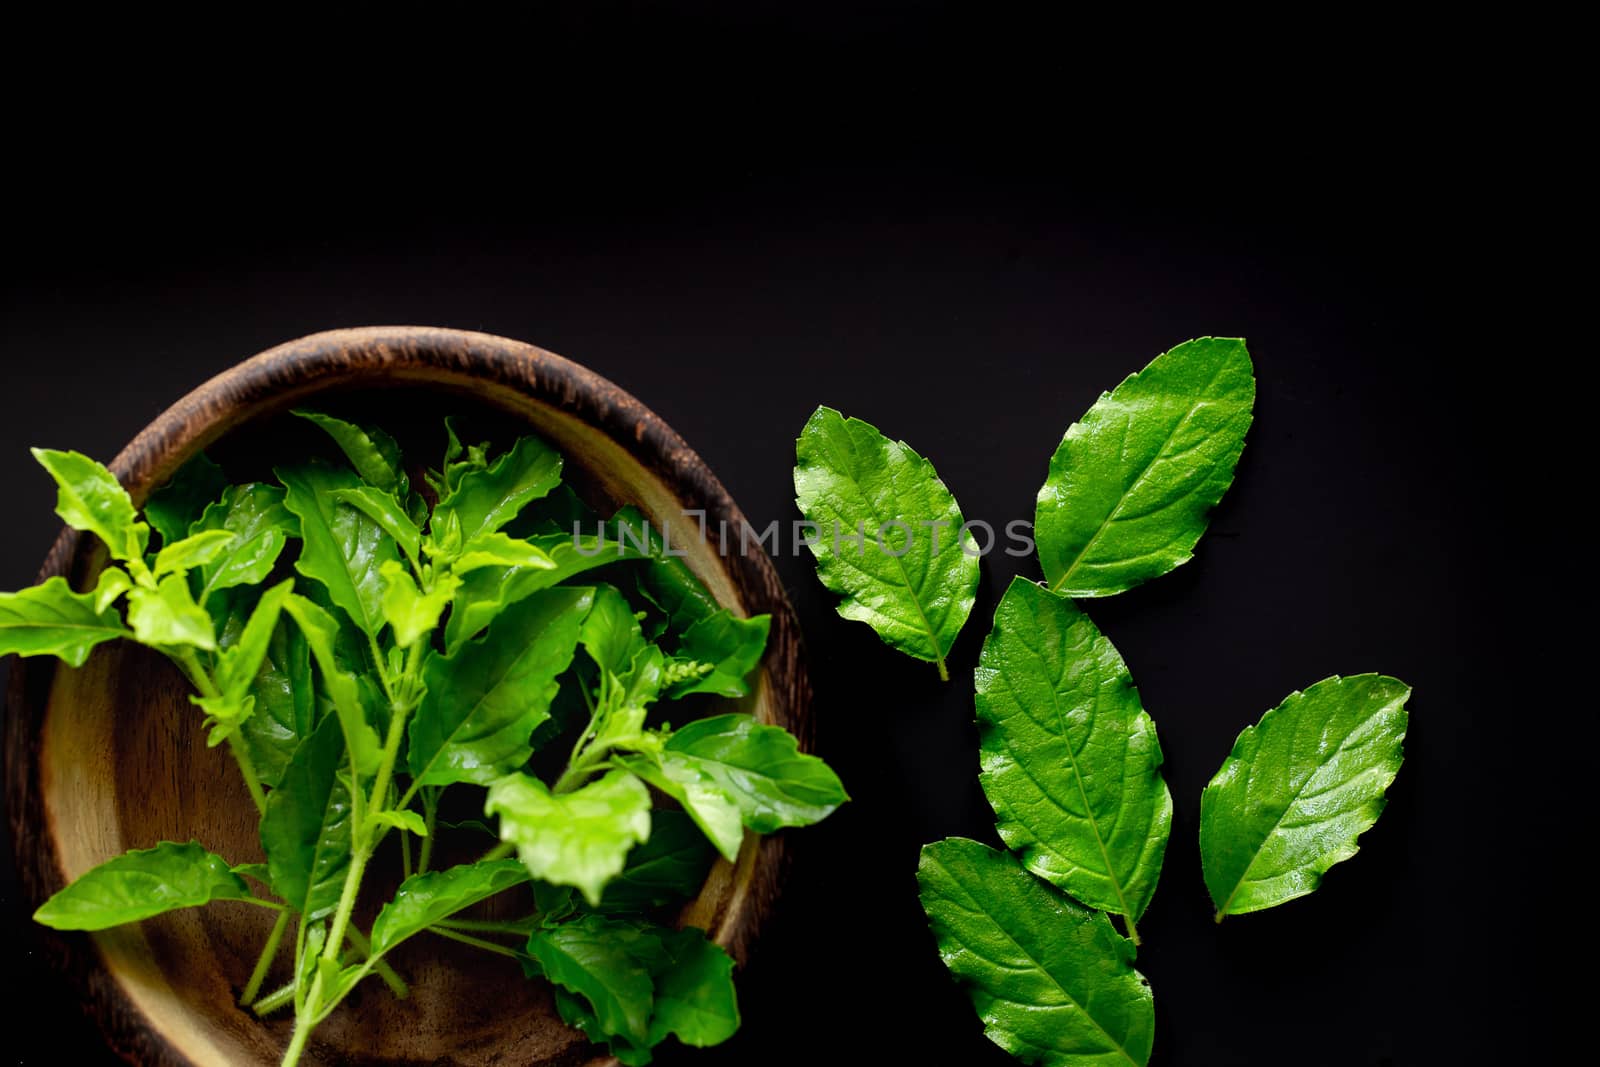 Fresh basil leaves on a black background and copy space.